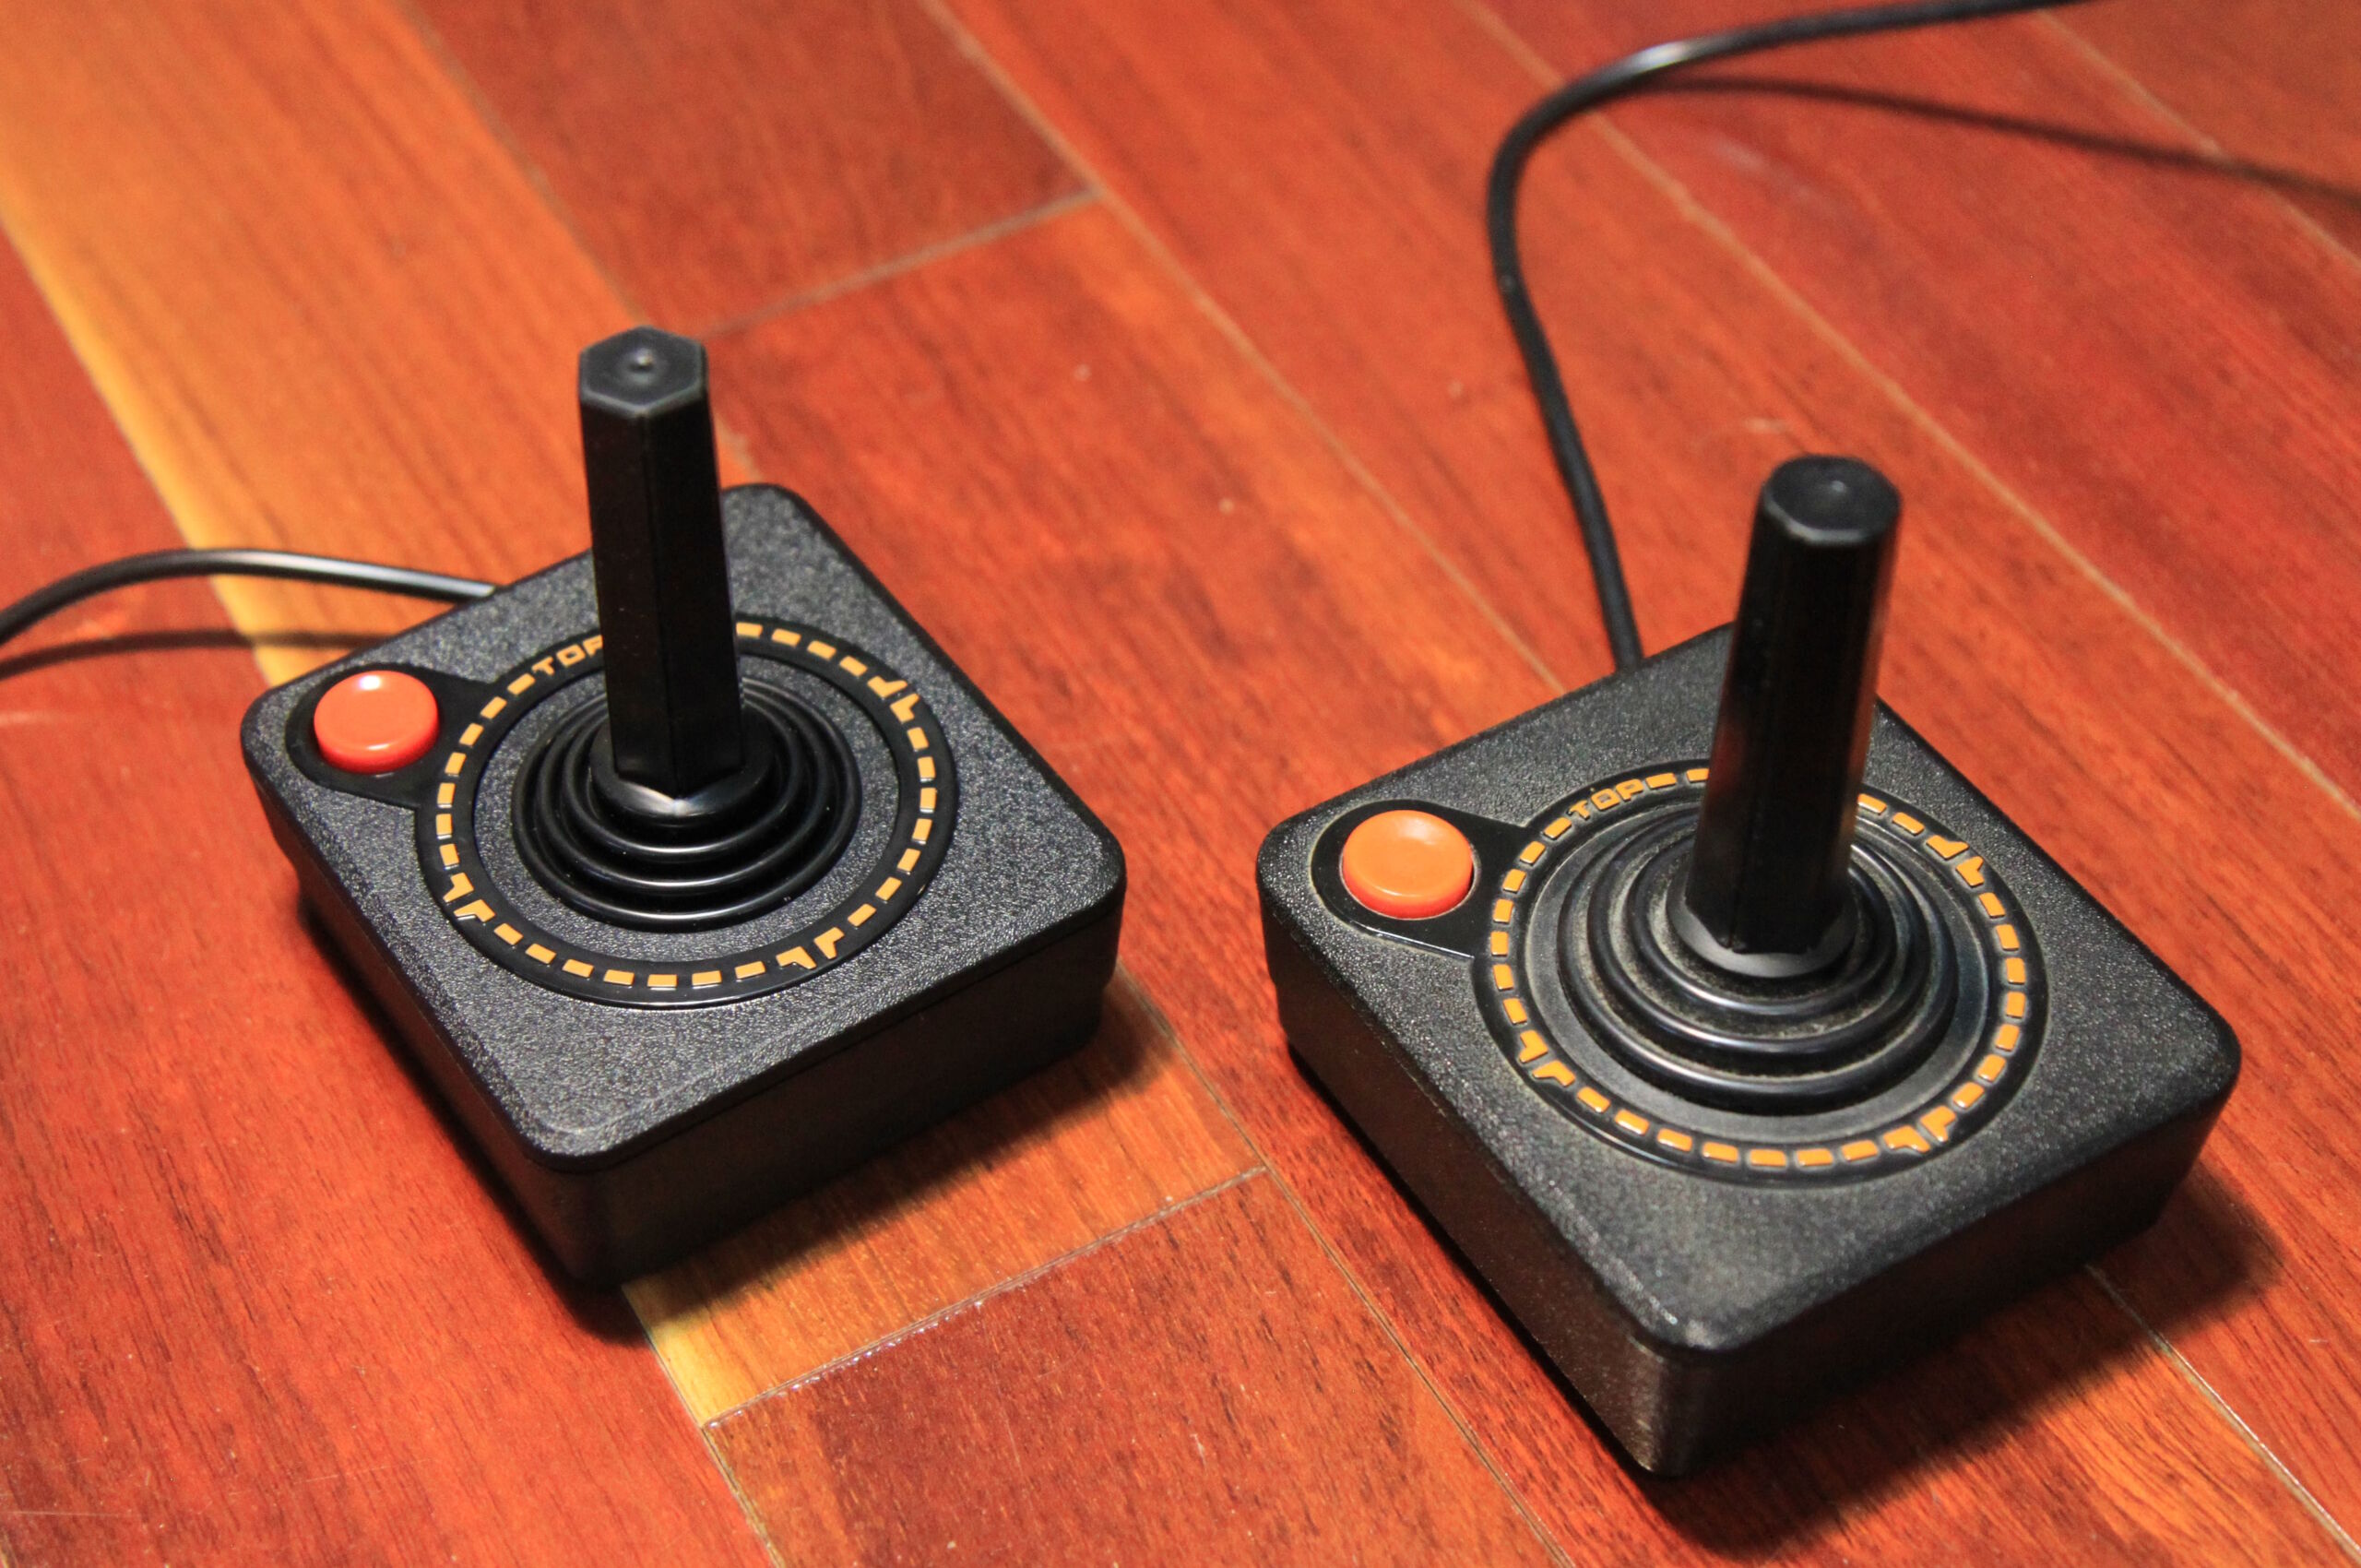 Atari 2600+ Is Now Available - GameSpot